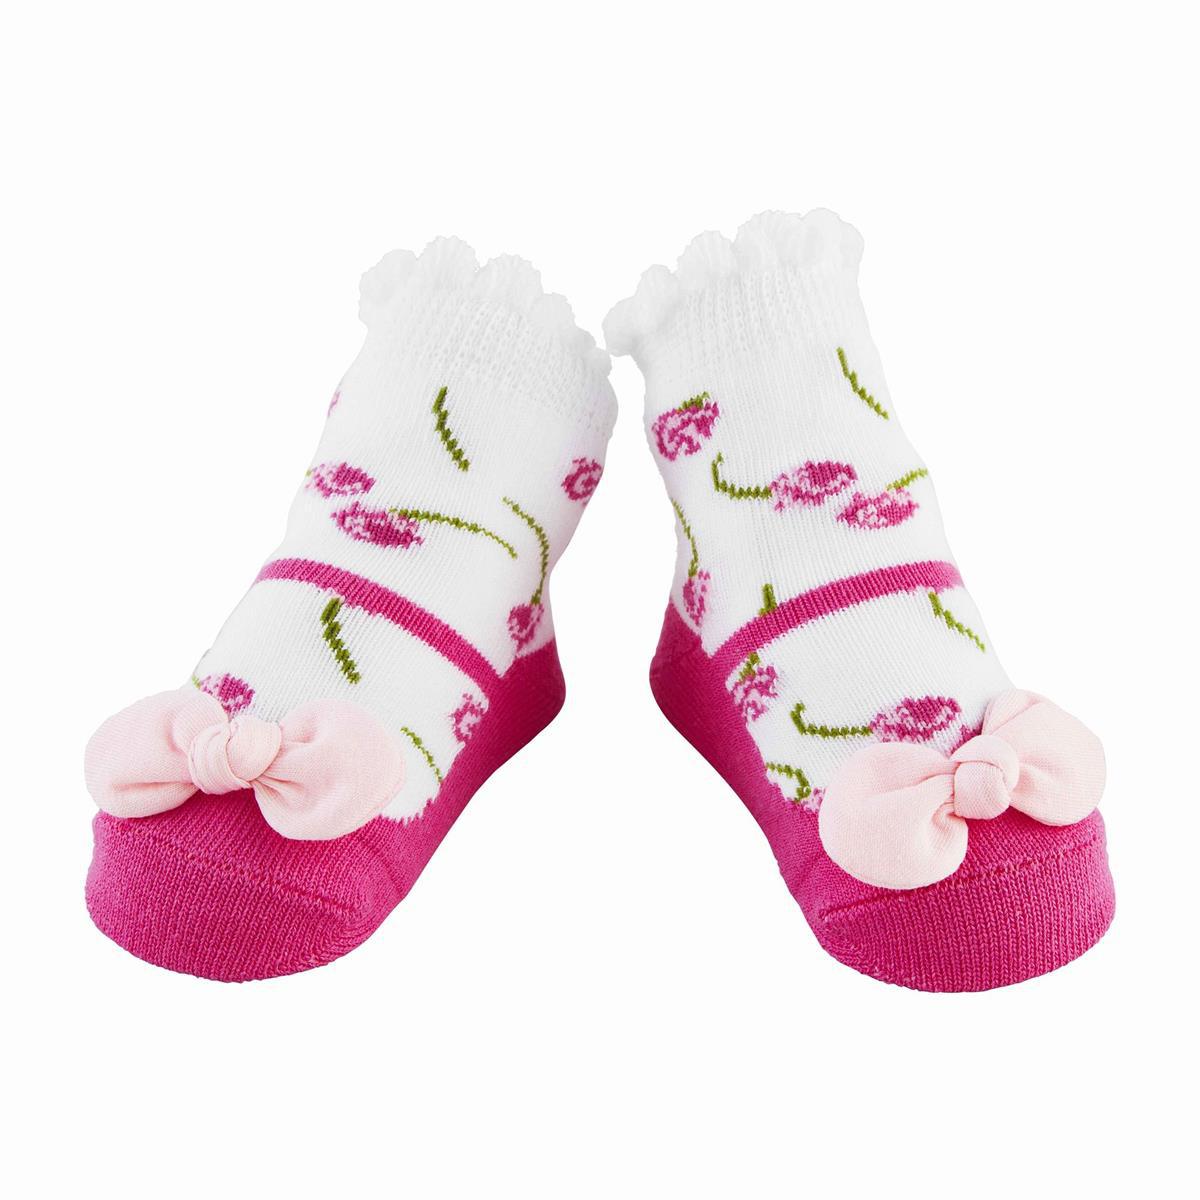 Mud Pie Petite Rose Baby Socks - BeautyOfASite - Central Illinois Gifts, Fashion & Beauty Boutique